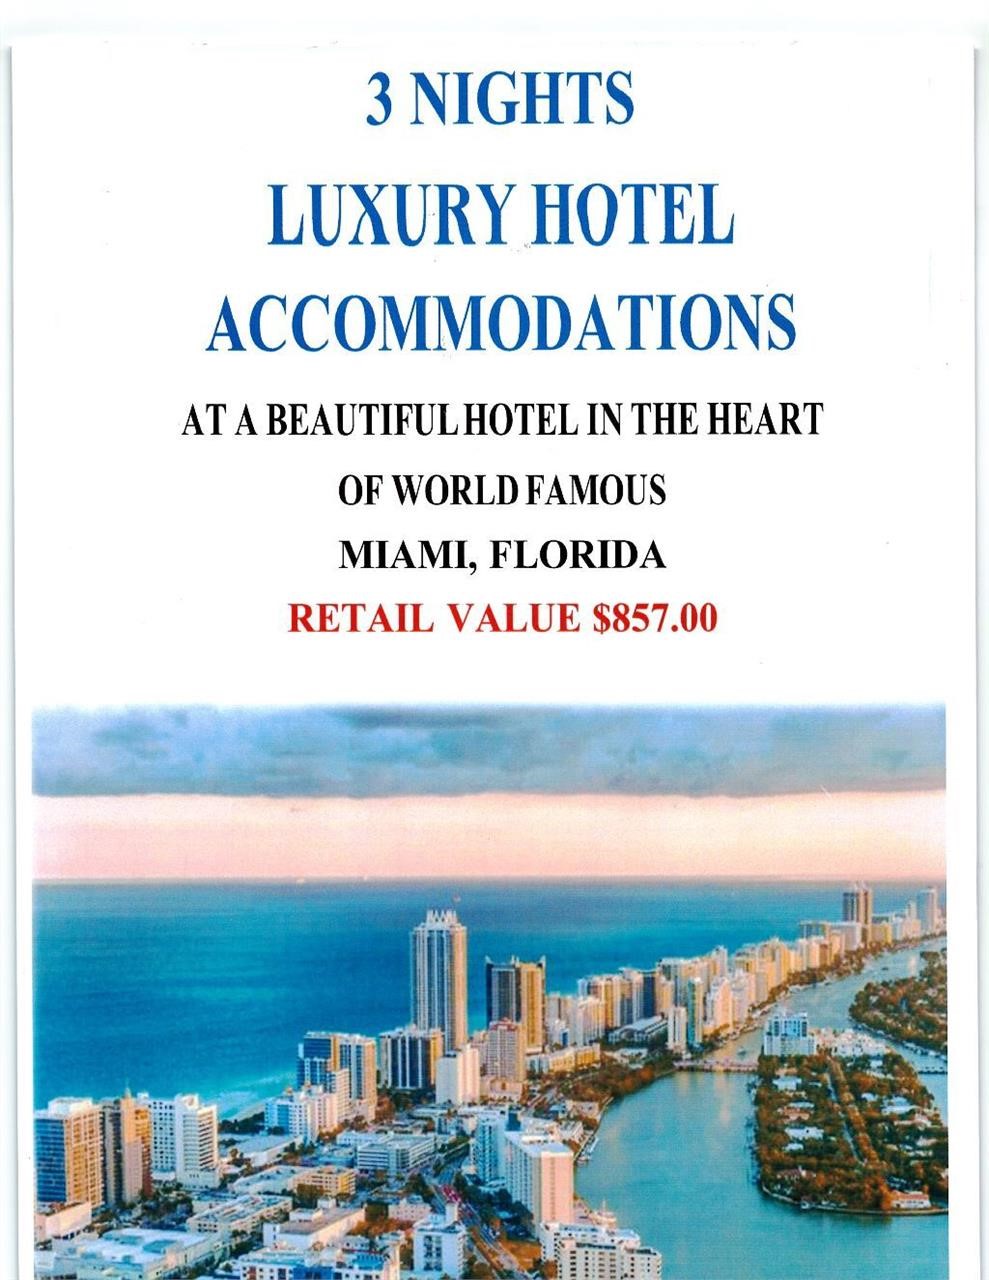 MAY 11TH. Vacation Hotel Accommodation Packages Auction